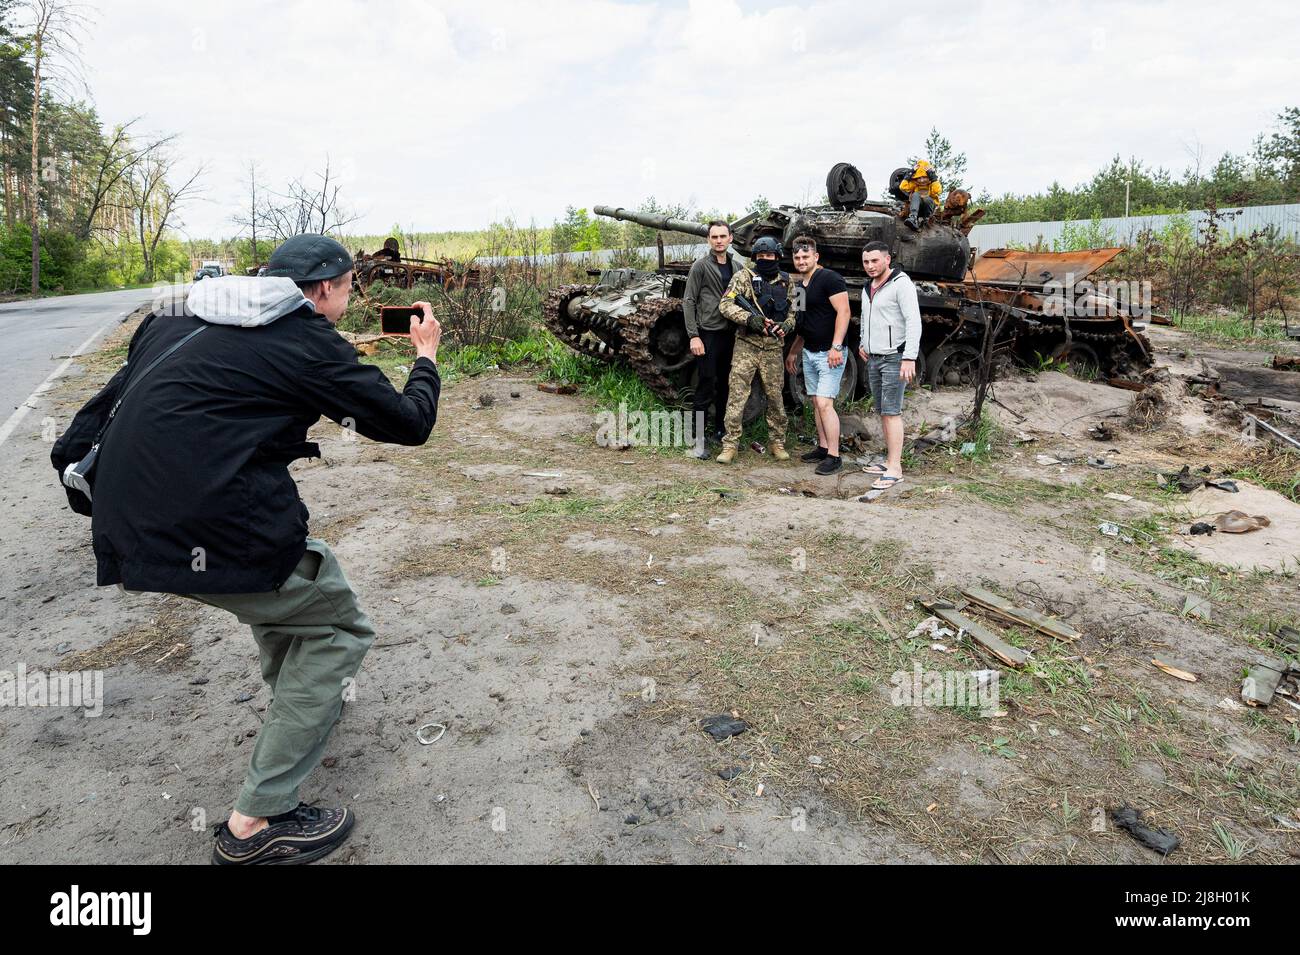 Nalyvaikivka, Ukraine. 15th May, 2022. People being photographed in front of a destroyed Russian tank in Nalyvaikivka. Credit: SOPA Images Limited/Alamy Live News Stock Photo